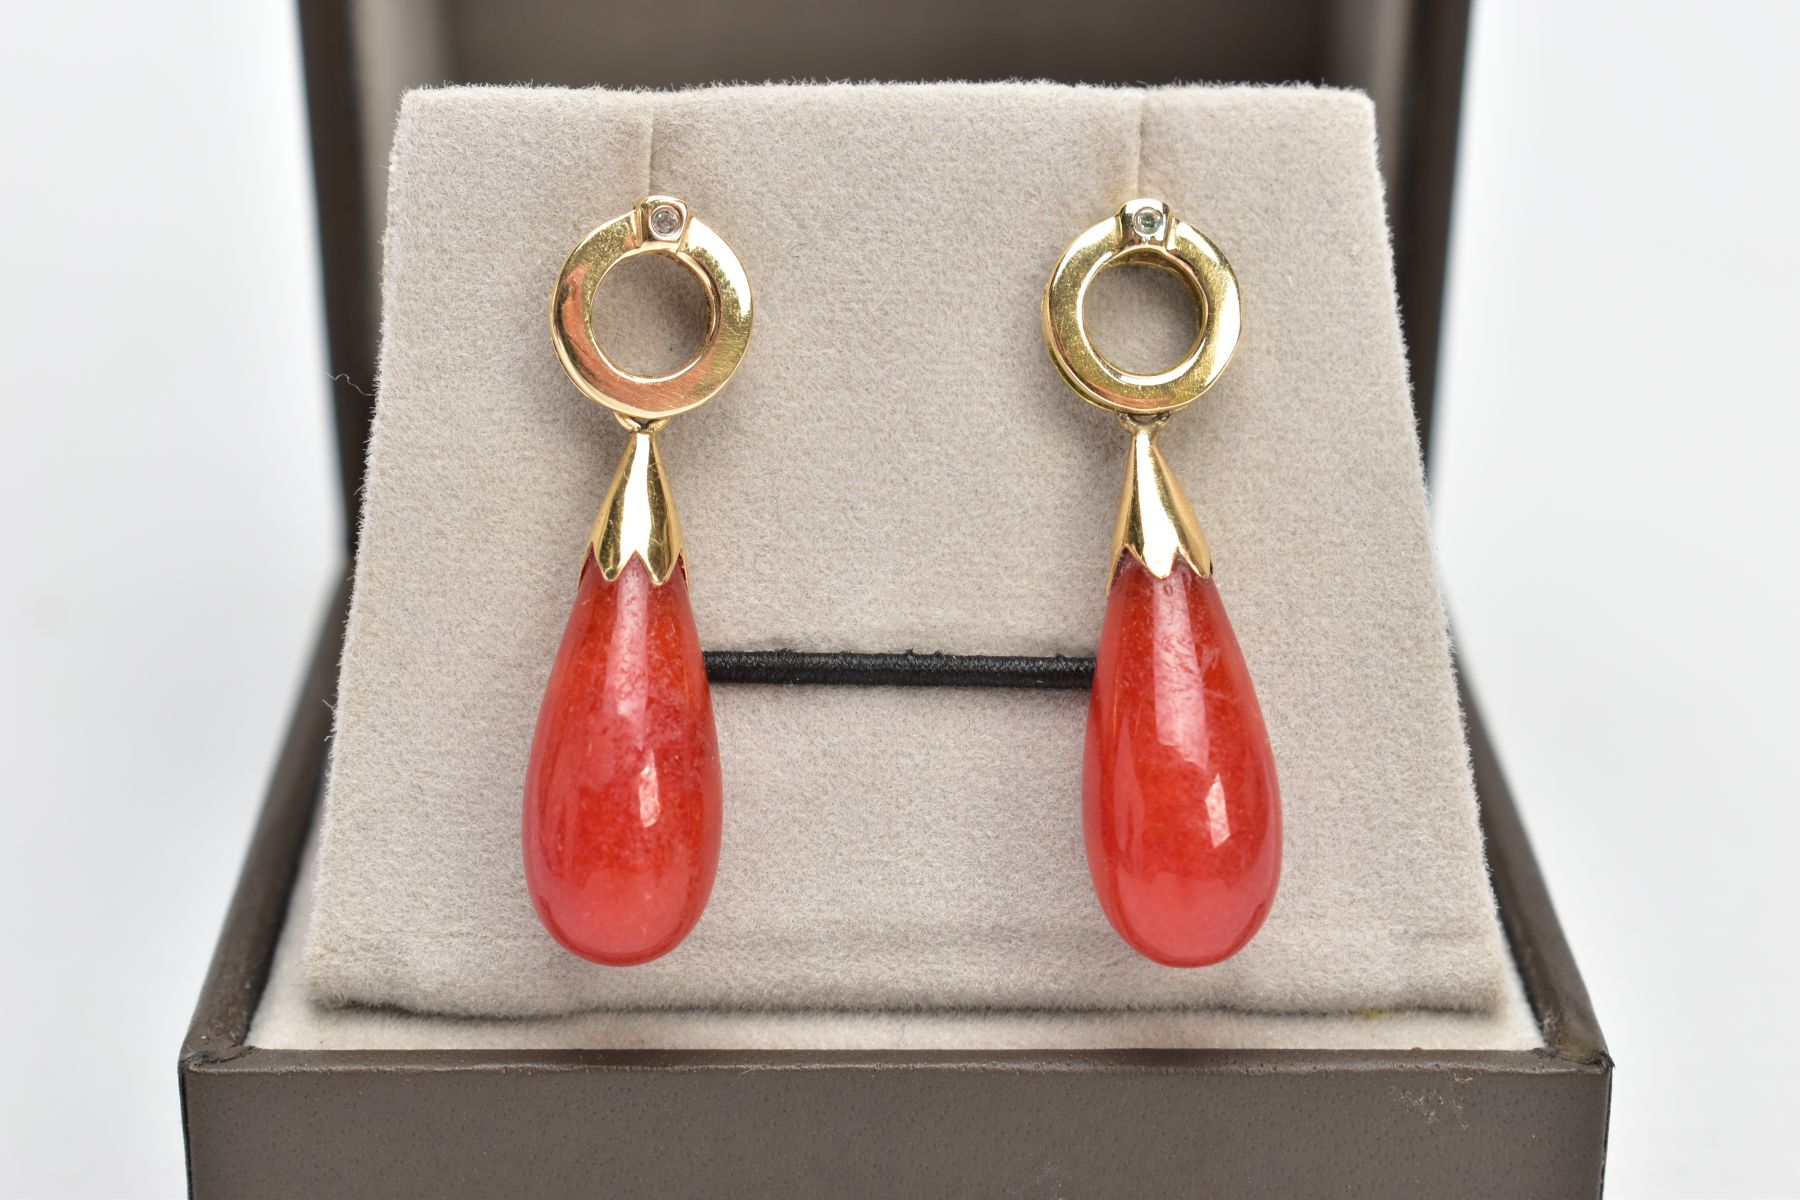 A PAIR OF AGATE DROP EARRINGS, tear drop polished agate earrings in a yellow metal setting, with